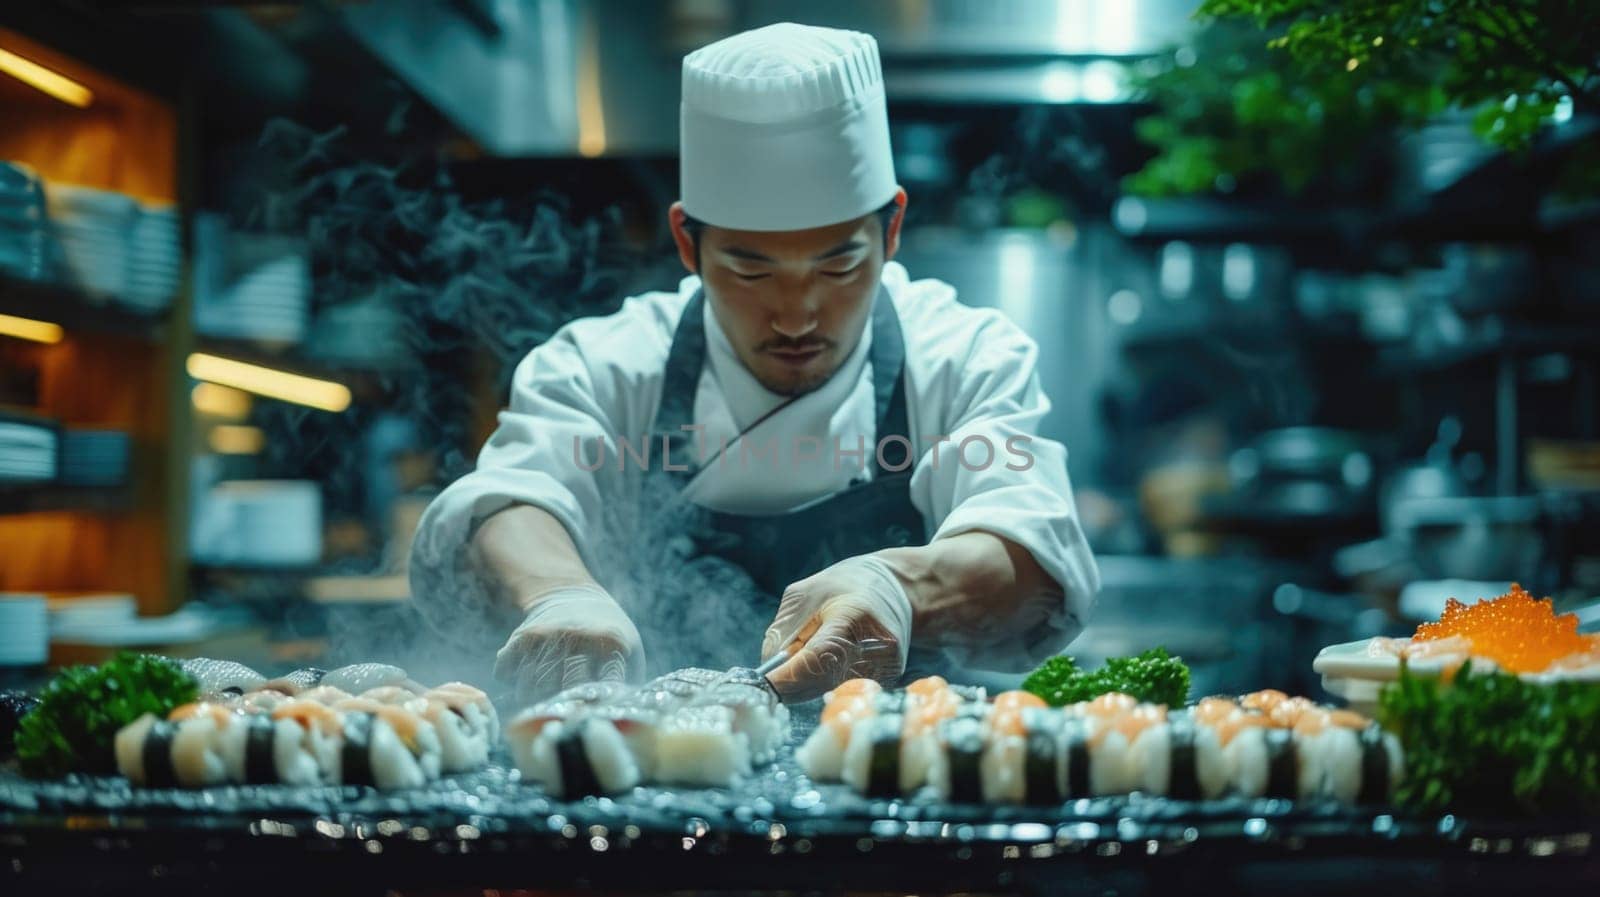 A skilled chef of Asian appearance creates unique rolls and sushi by Yurich32